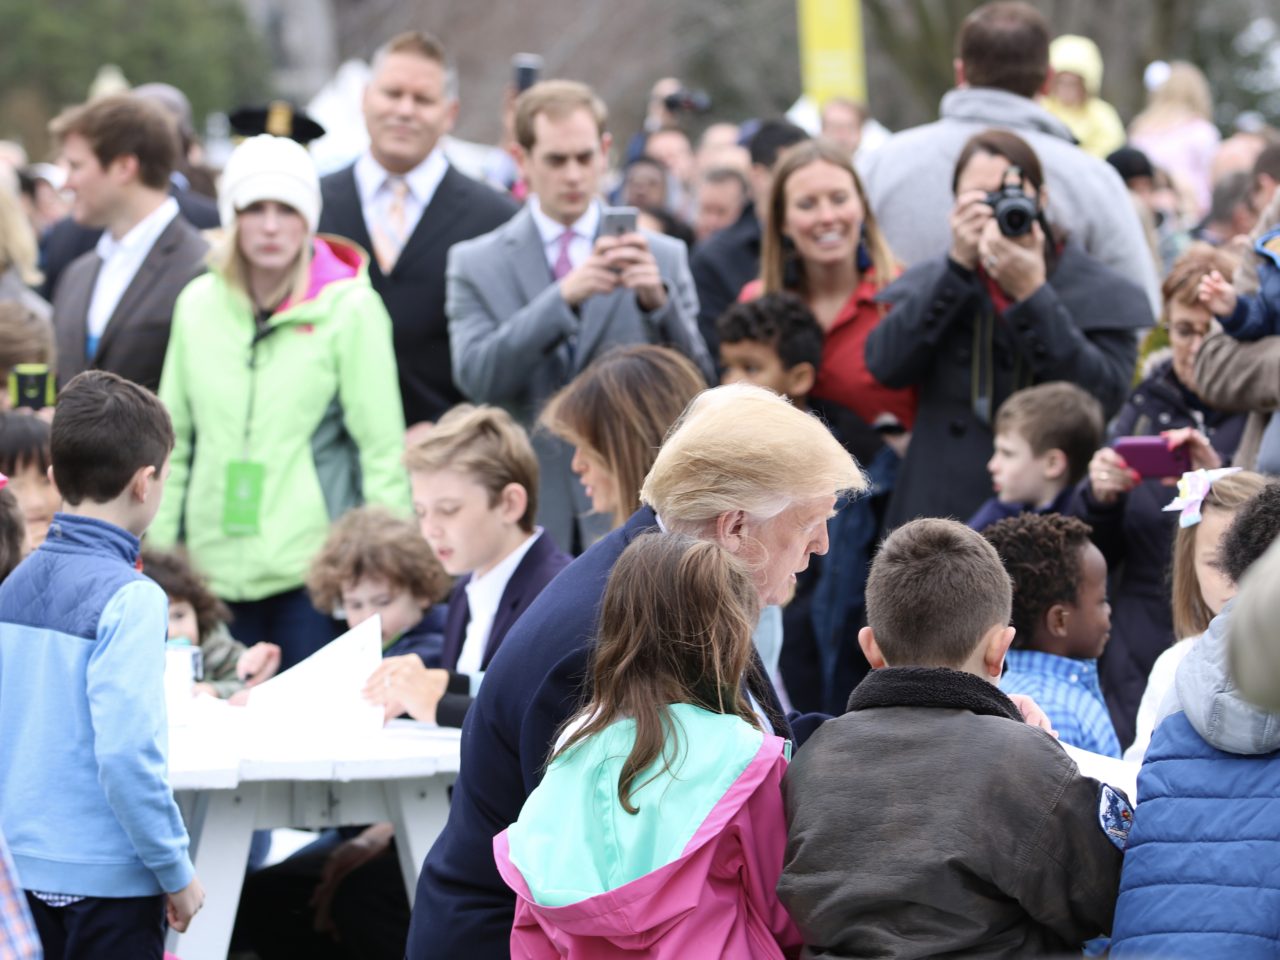 Breitbart President Trump, First Lady Melania, and their son Barron visit with children at the Easter Egg roll (Credit: Michelle Moons/Breitbart News)